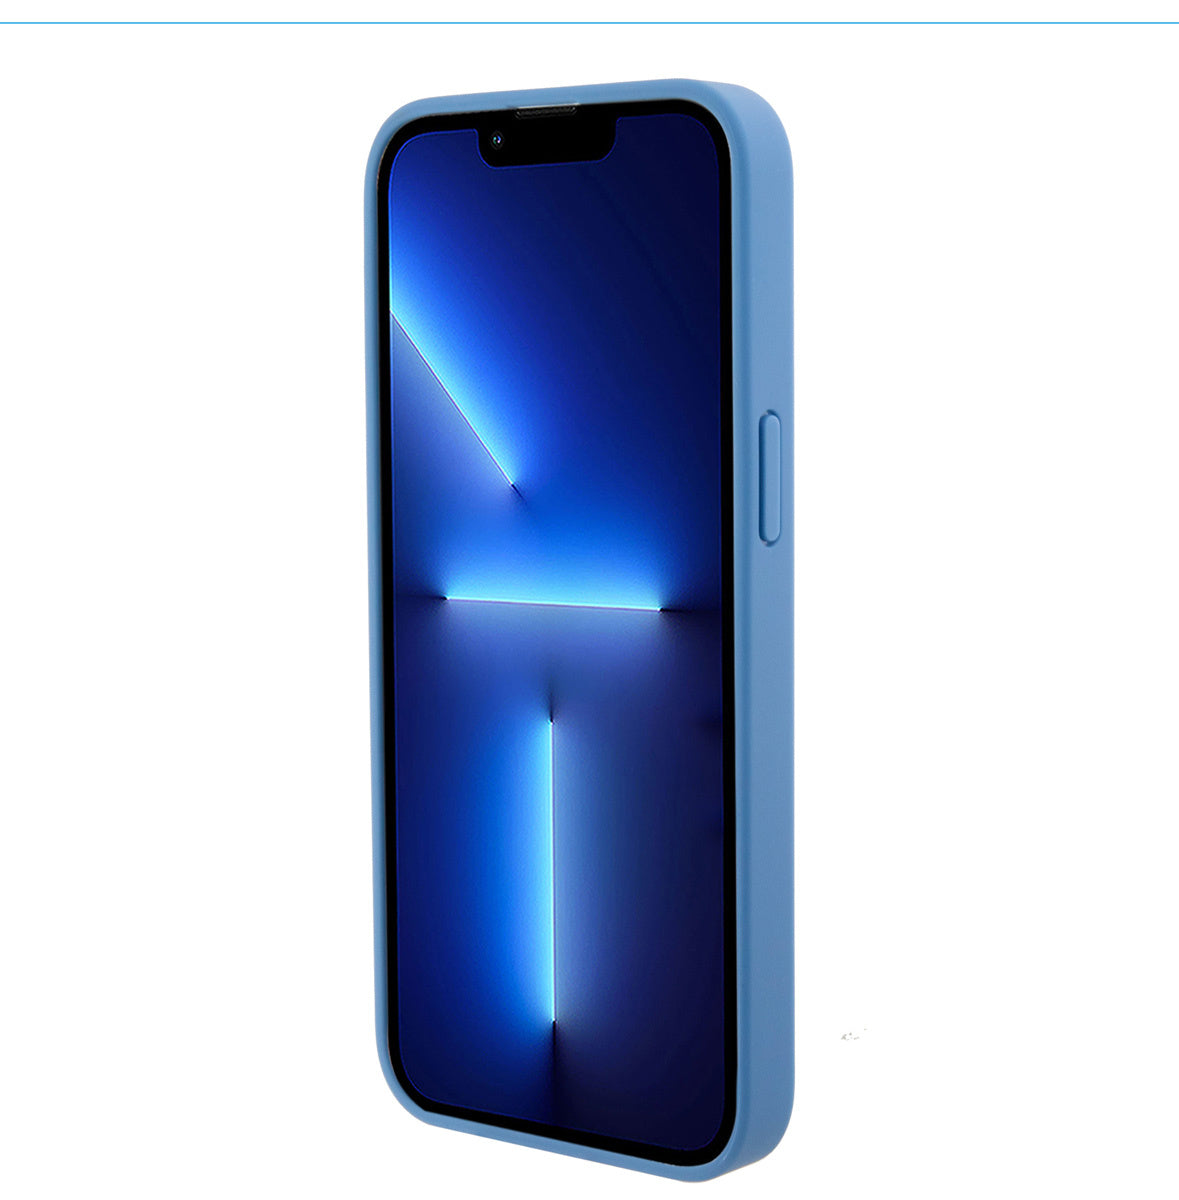 Guess iPhone 15 PRO MAX Backcover met ringhouder - Blauw